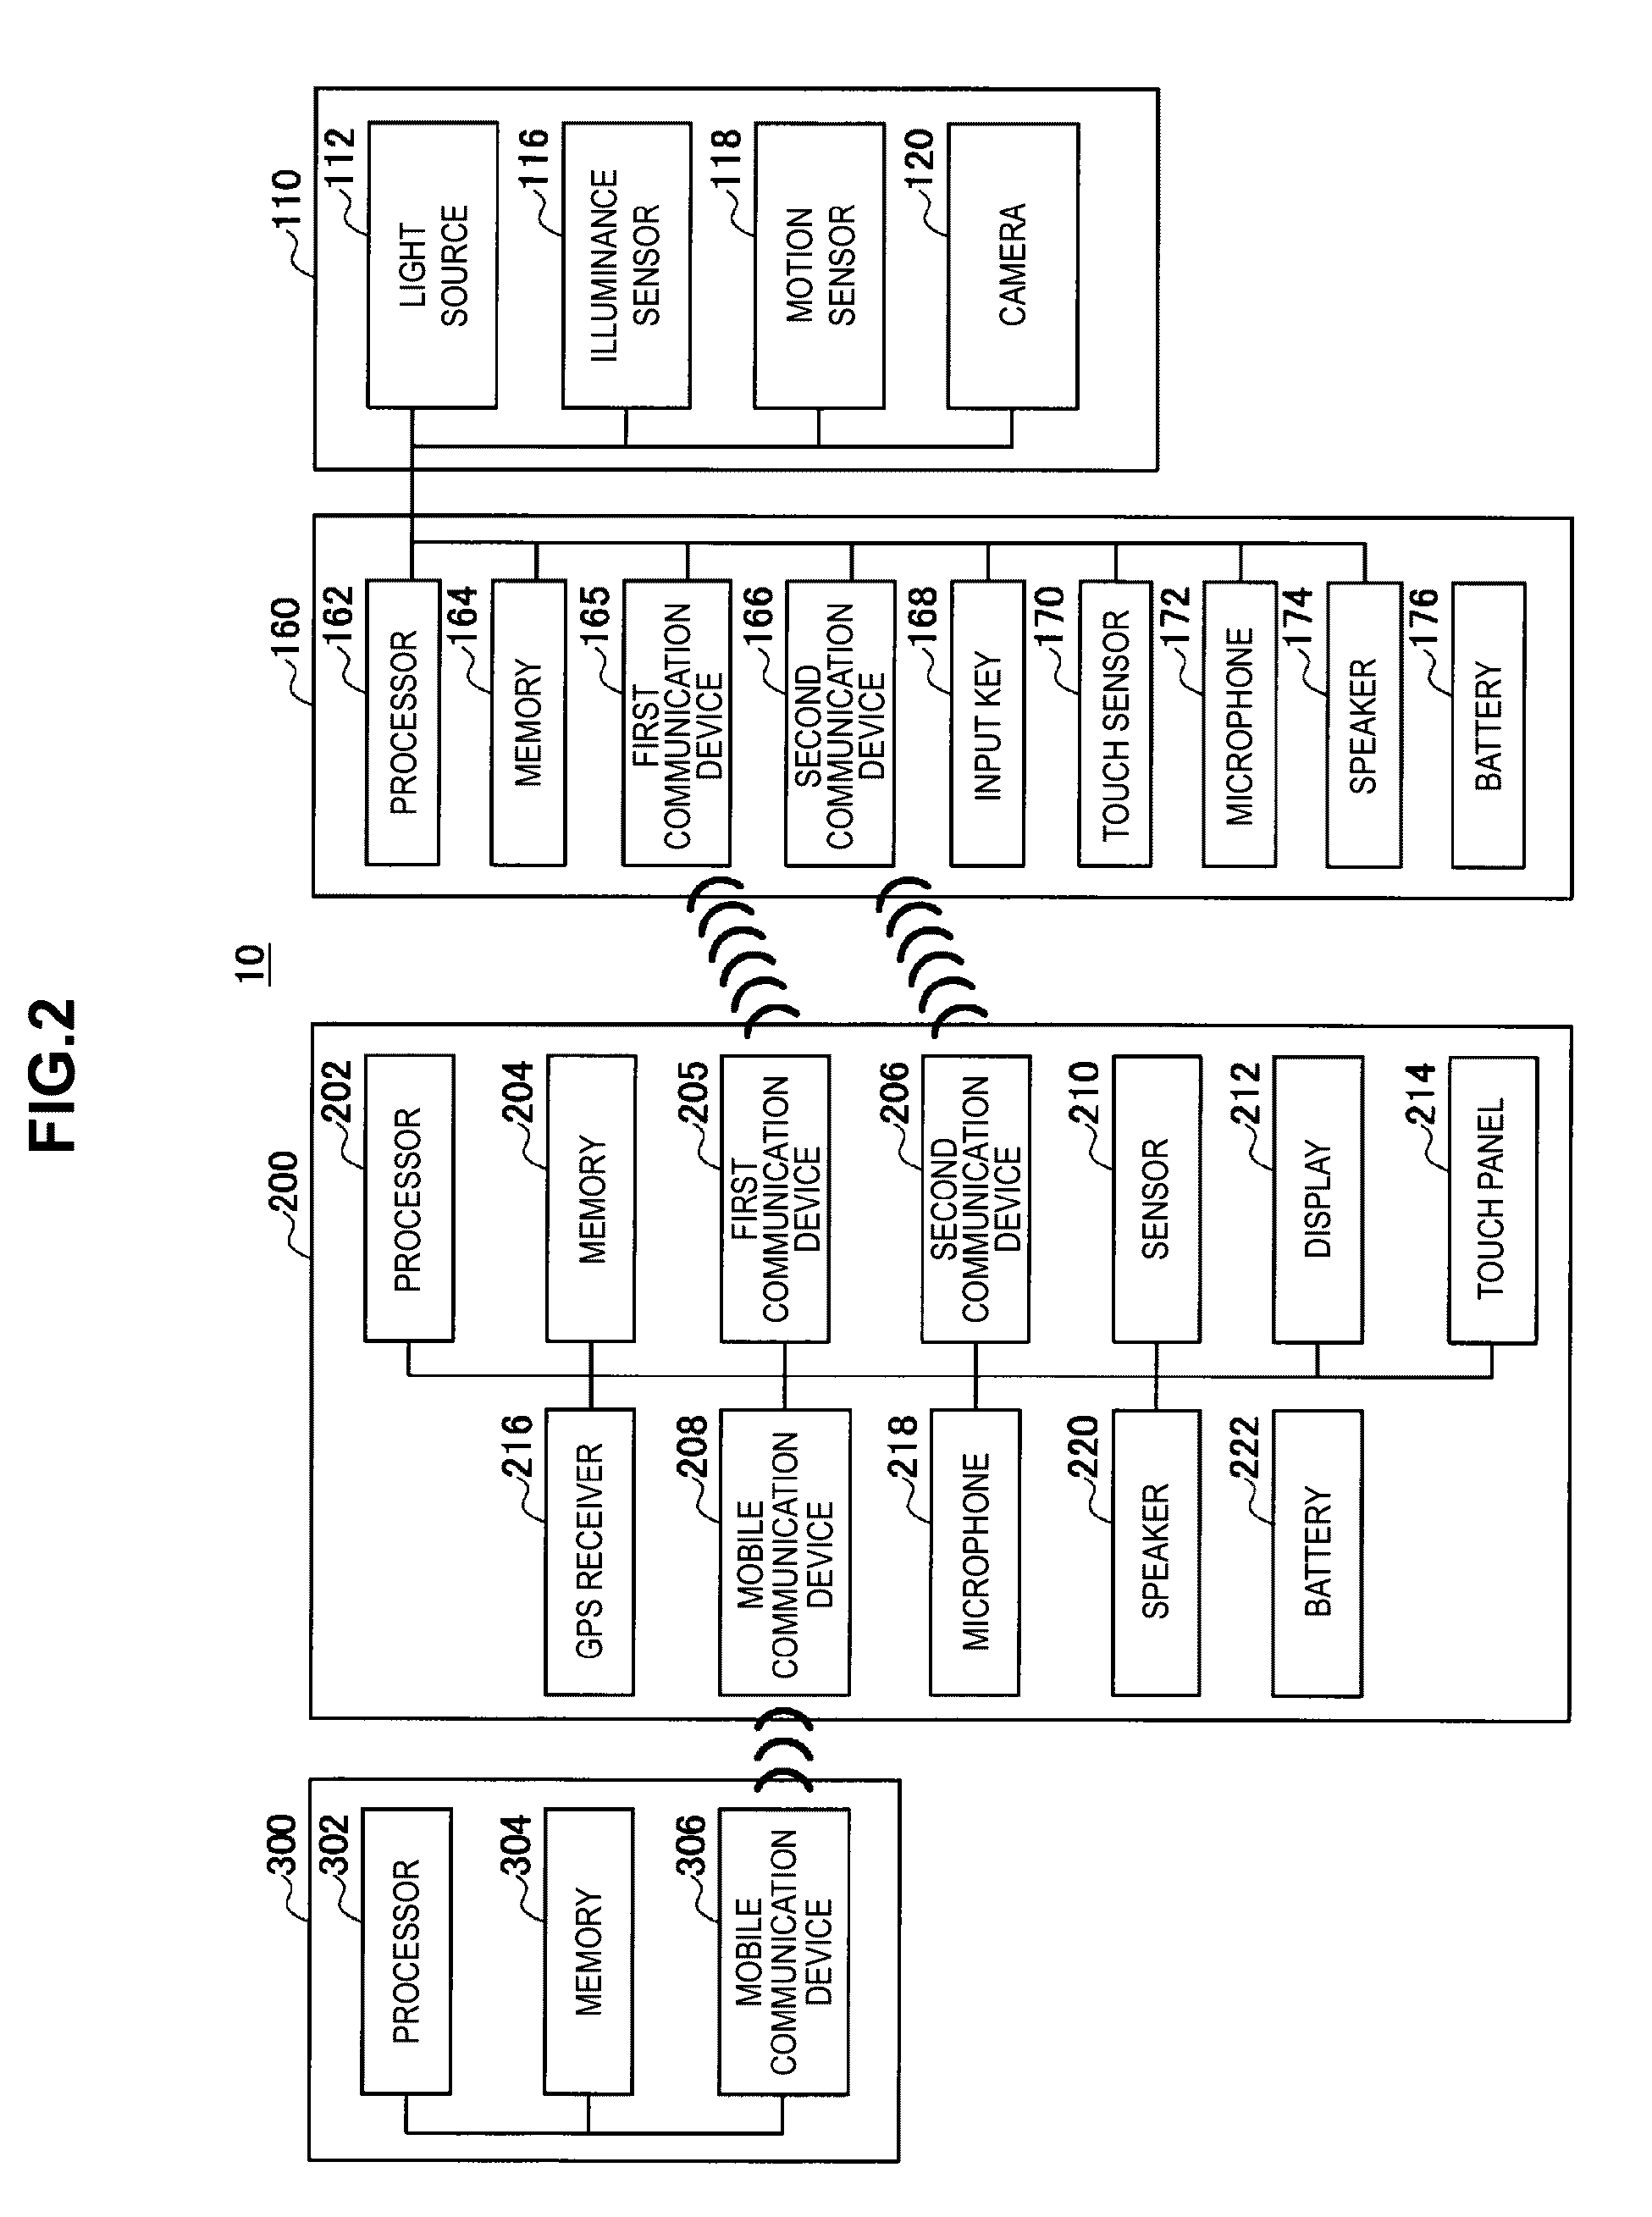 Communication control device, method of controlling communication, and program